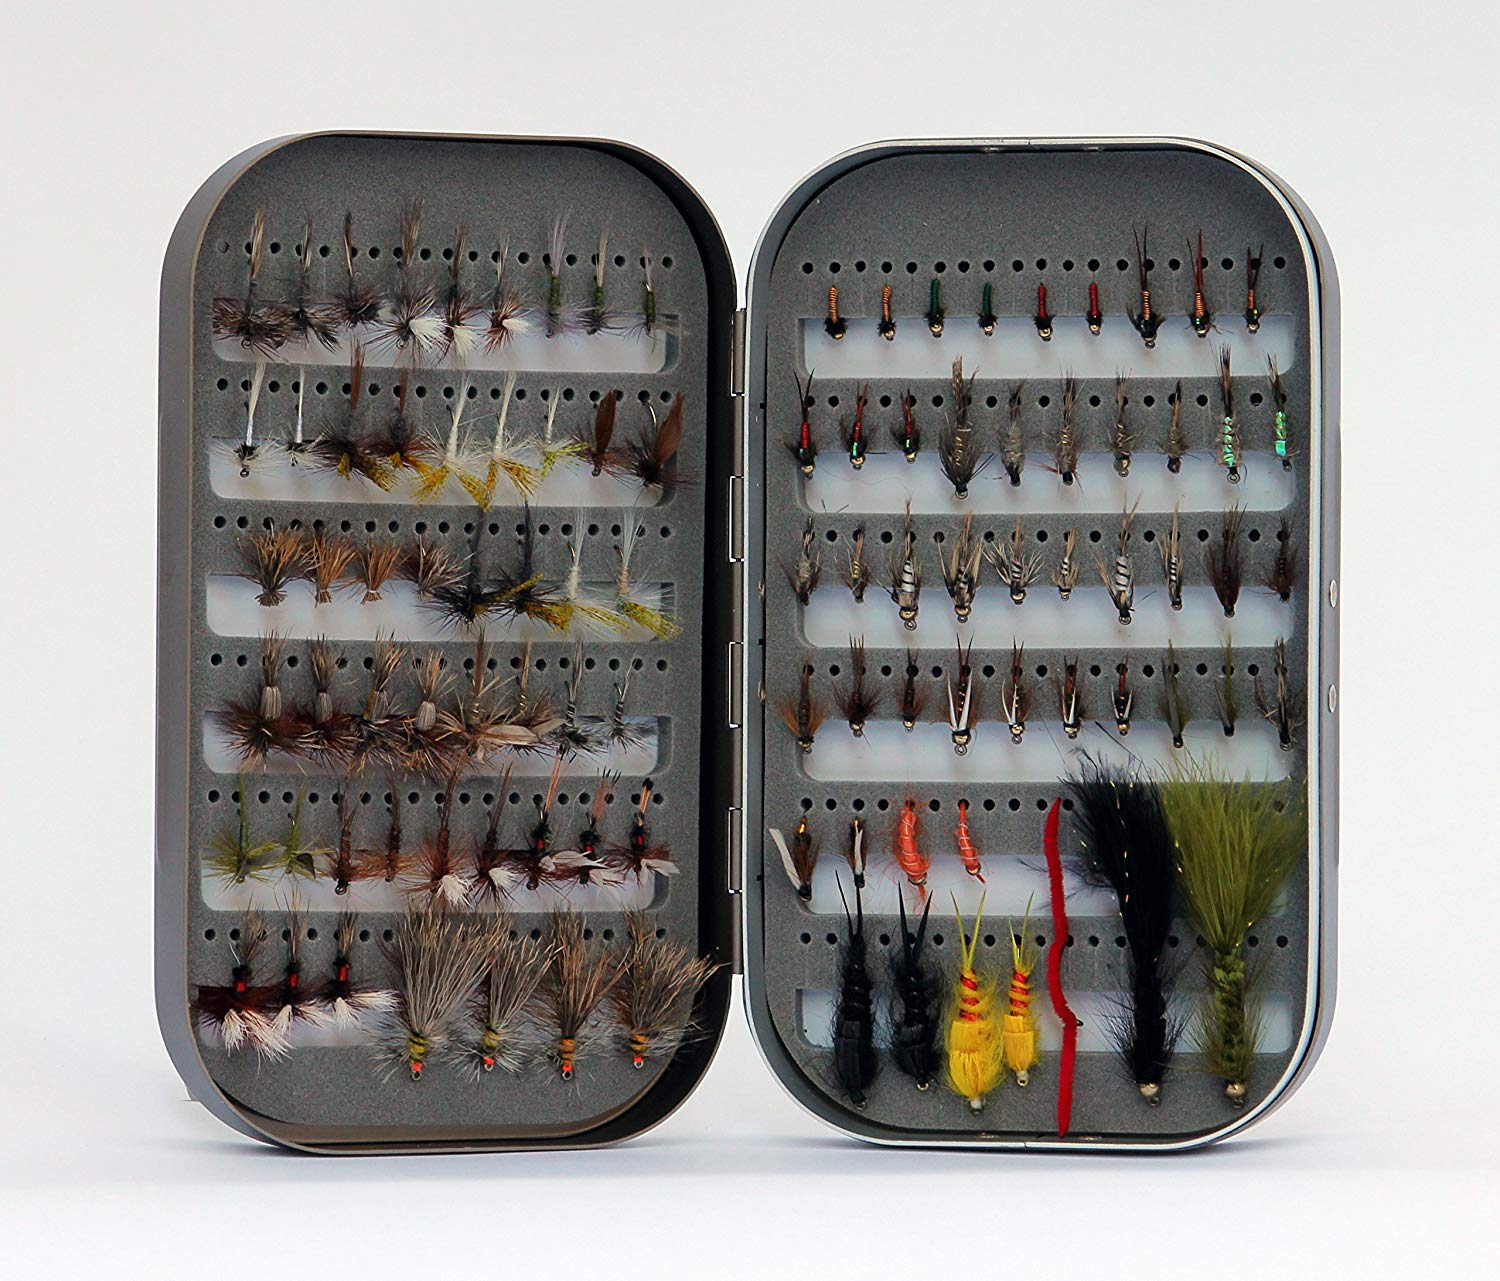 Dries SF Fly Fishing Box Flies Case Waterproof Salt-Rresistant Thick Strong Fly Lure Box Deep Slot for Hooks Bead,and so on Nymphs Streamers